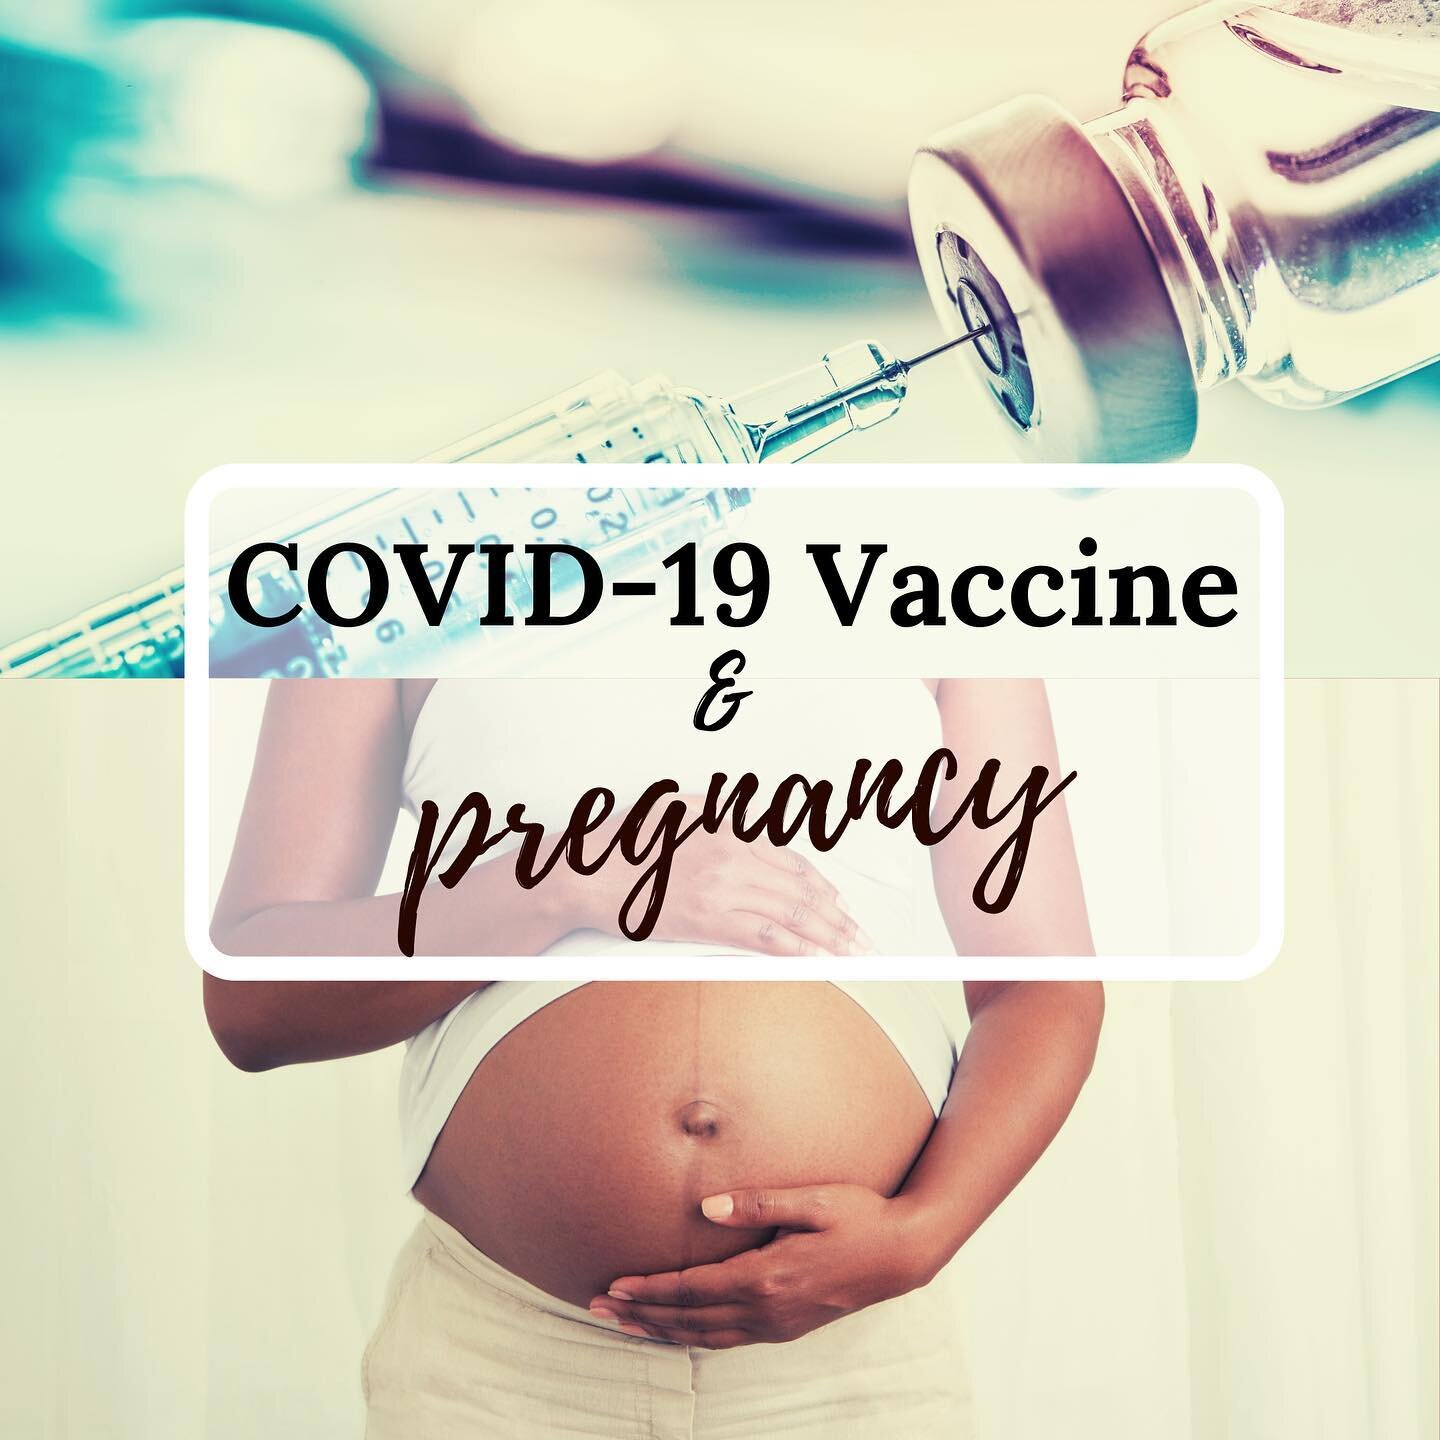 🌿The Society of Obstetricians &amp; Gynecologists of Canada (SOGC) statement on COVID-19 vaccination in pregnancy (updated January 11, 2021): &ldquo;Patients who are pregnant or breastfeeding should be offered vaccination at any time if they are eli